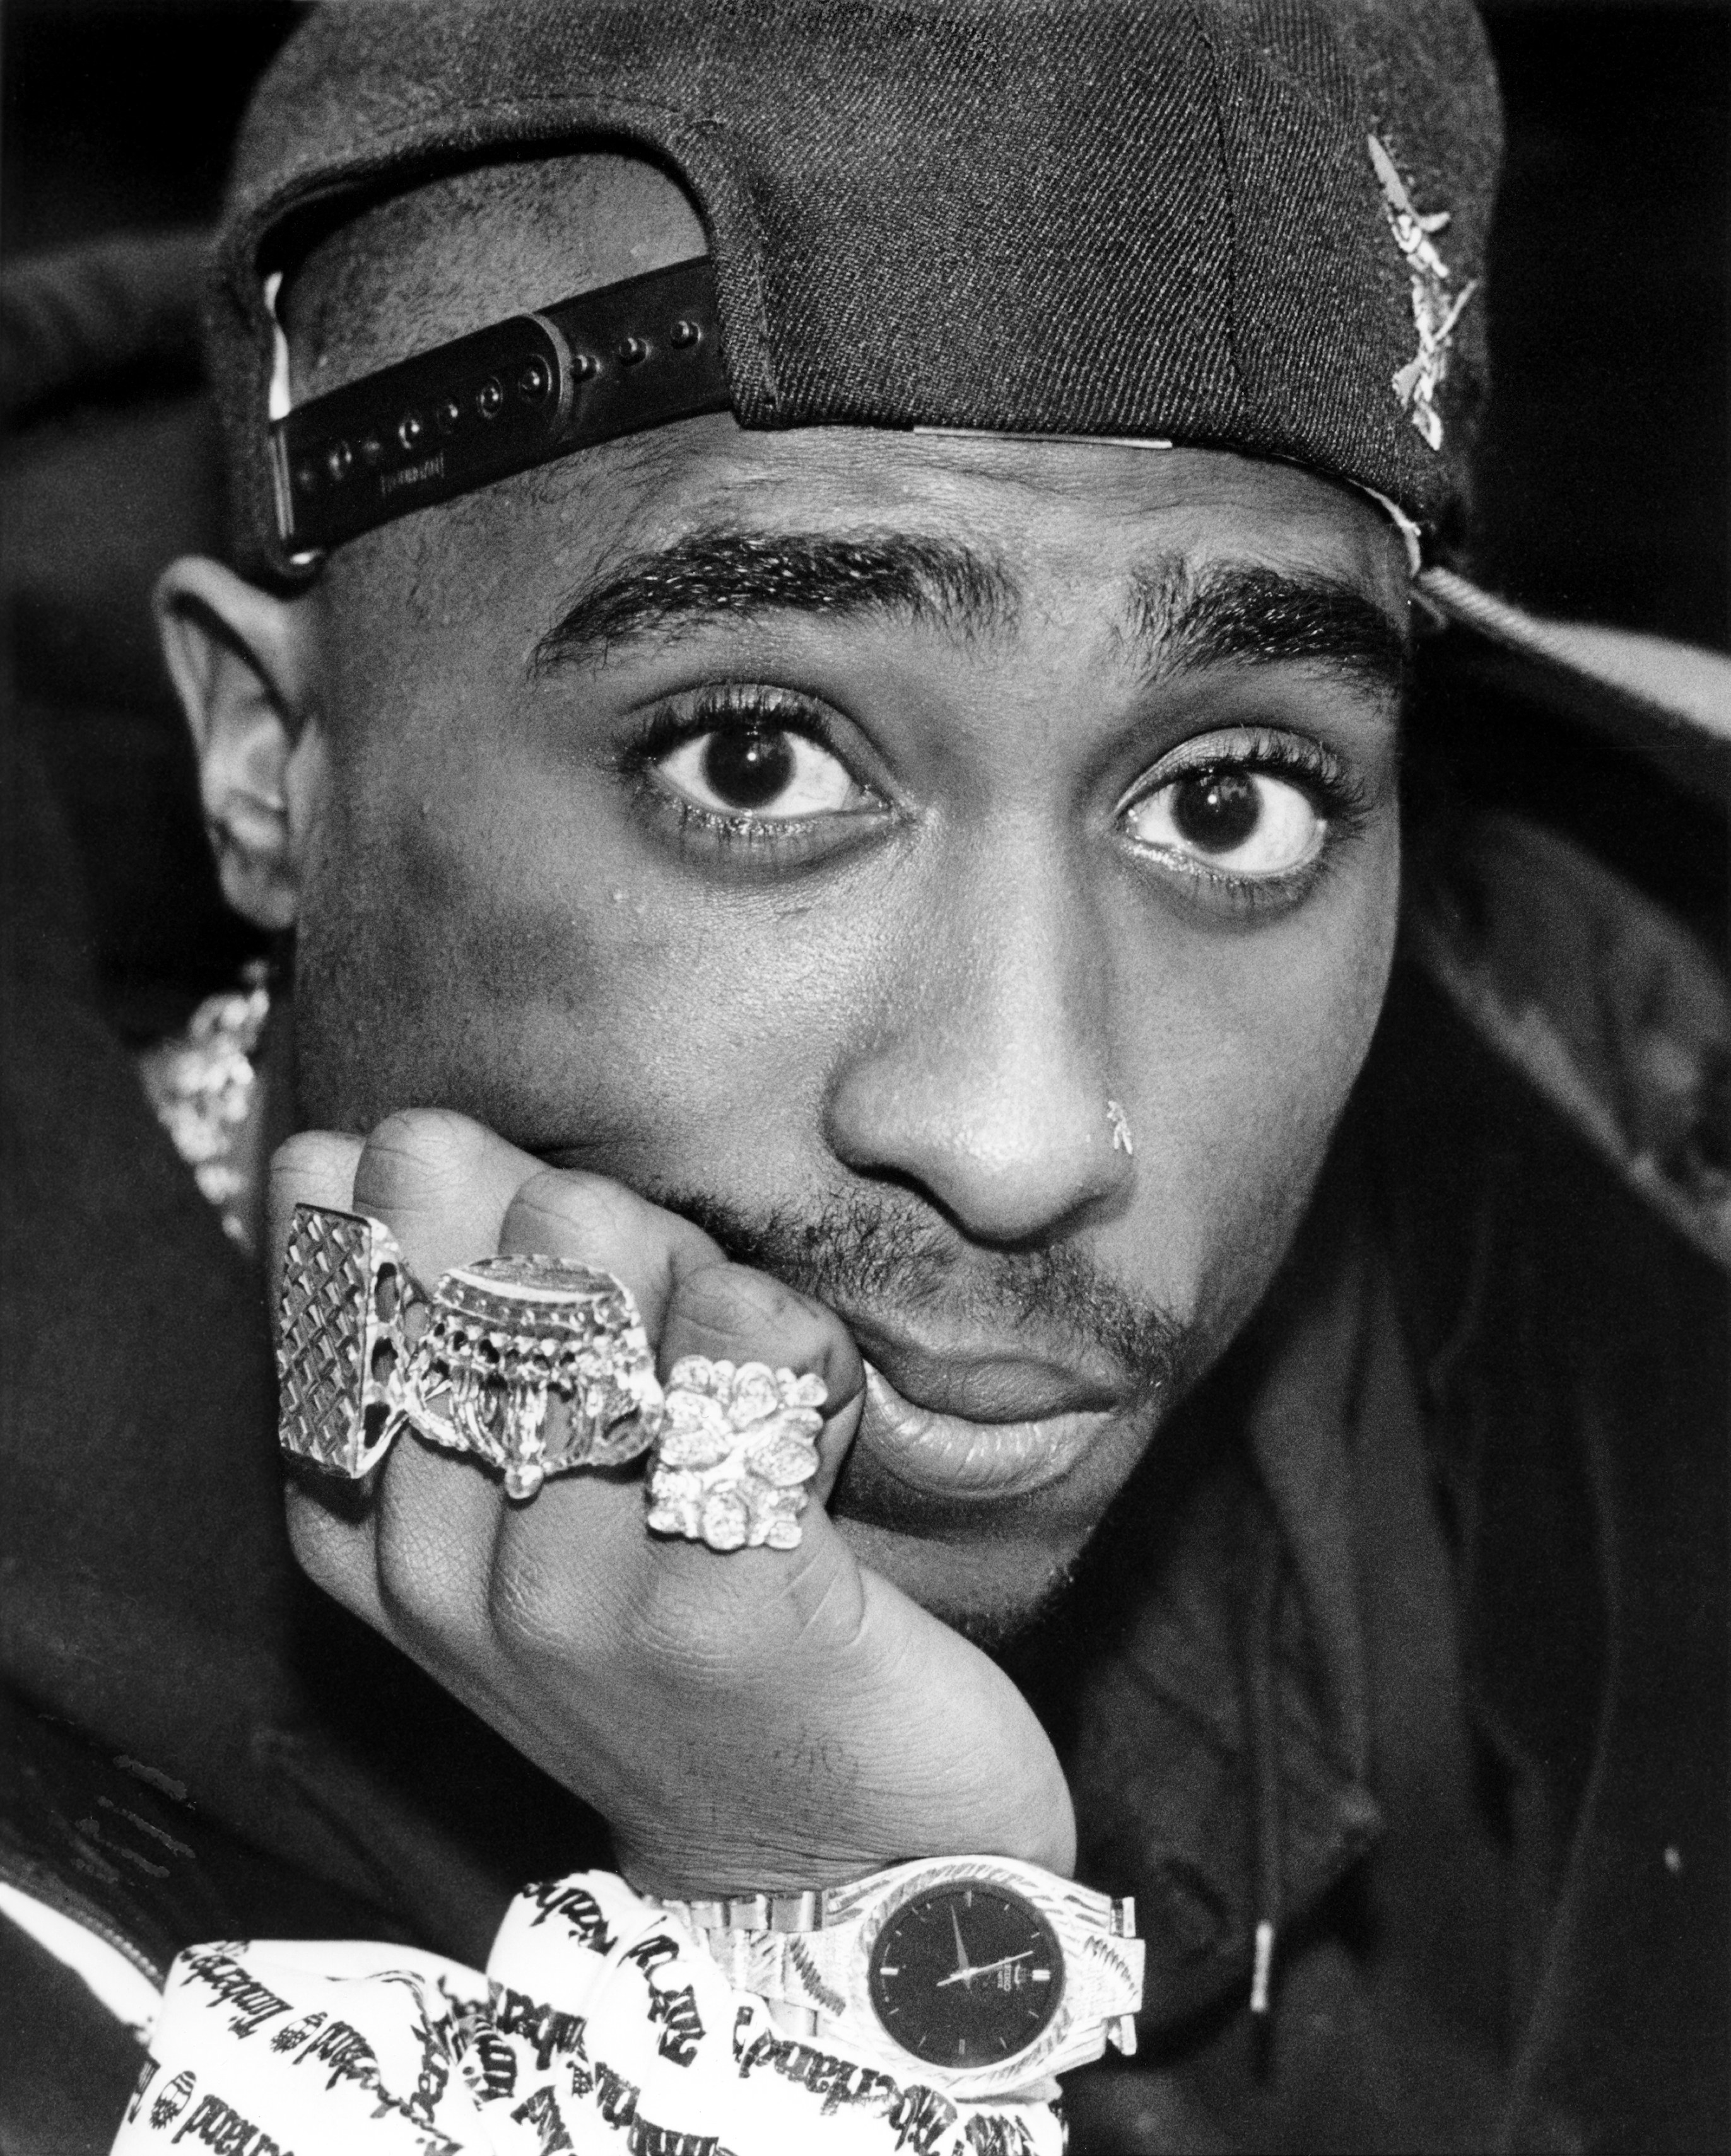 A close-up of Tupac&#x27;s face, wearing a backward cap, rings, and a wristwatch